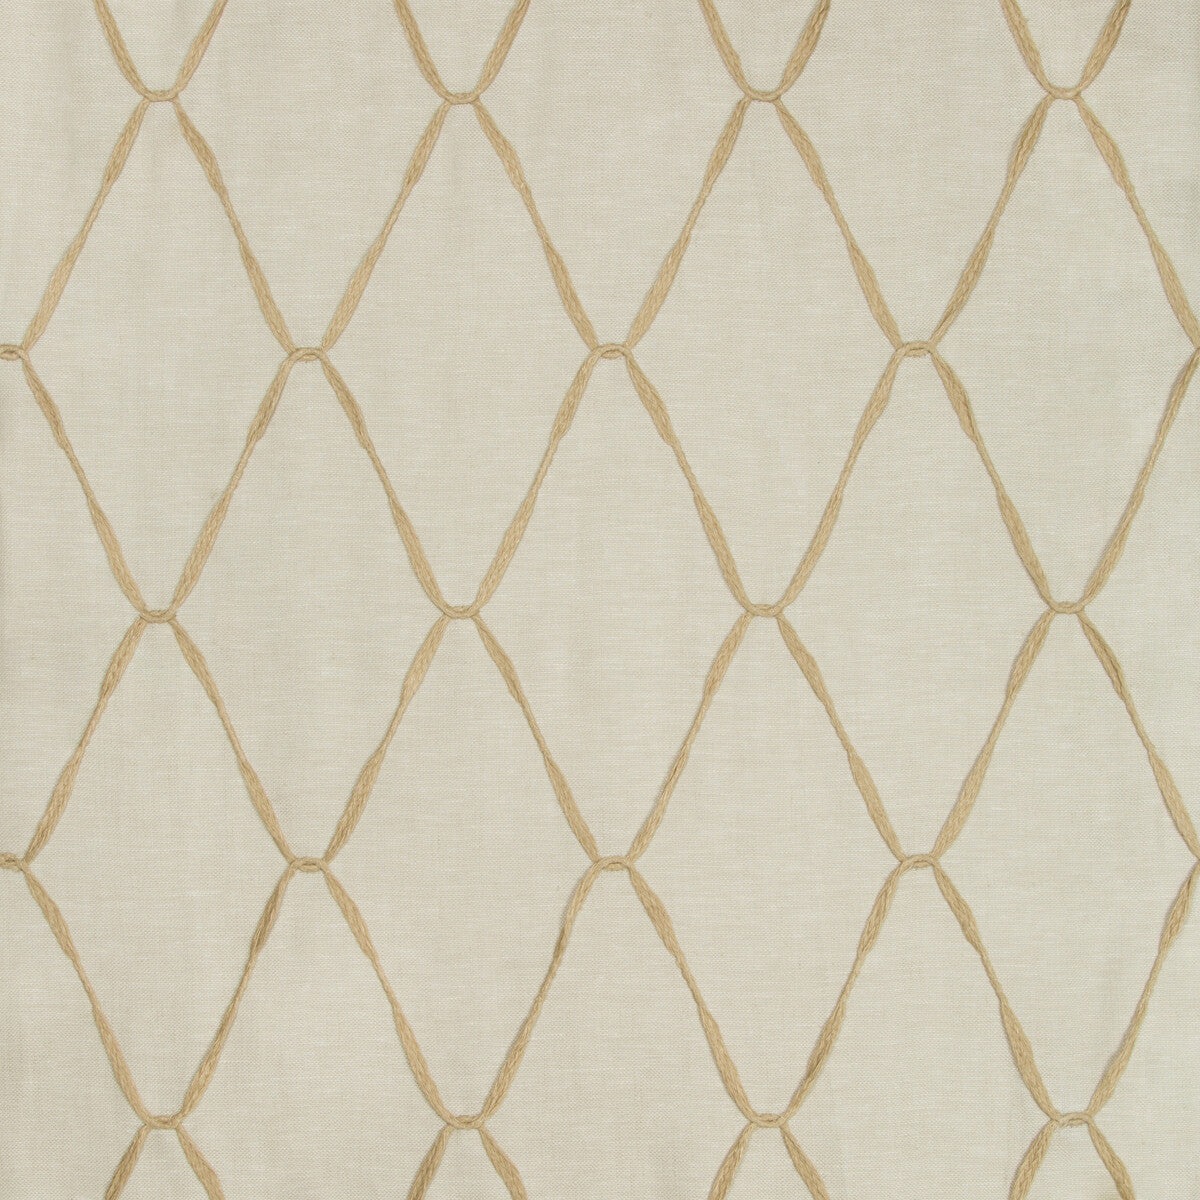 Looped Ribbons fabric in linen color - pattern 4476.16.0 - by Kravet Couture in the Sue Firestone Malibu collection